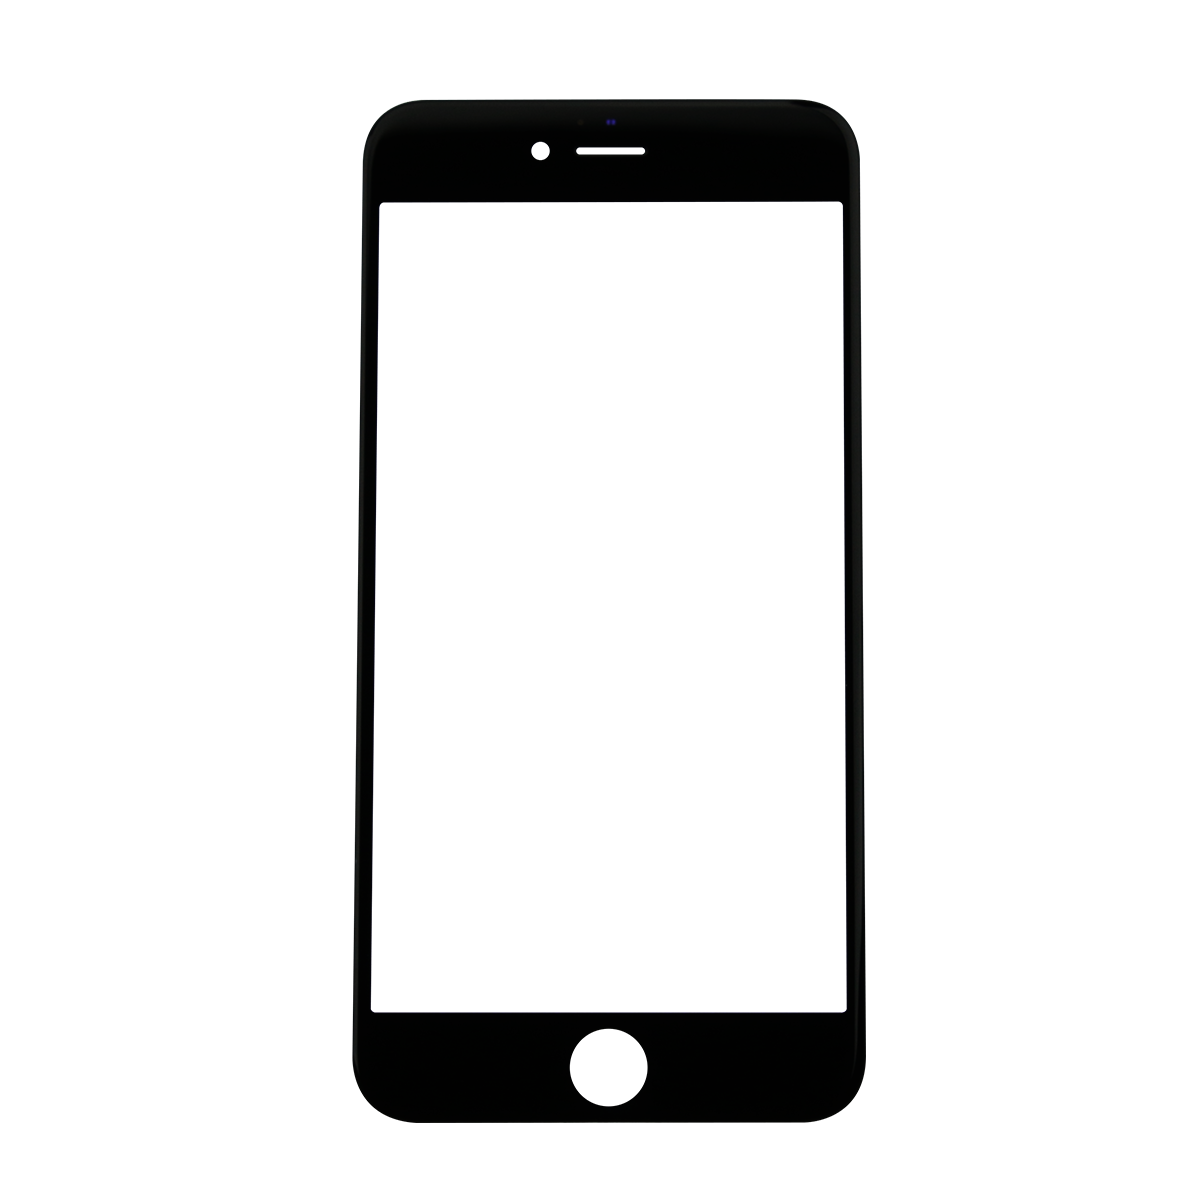 Iphone 7 Screen Png